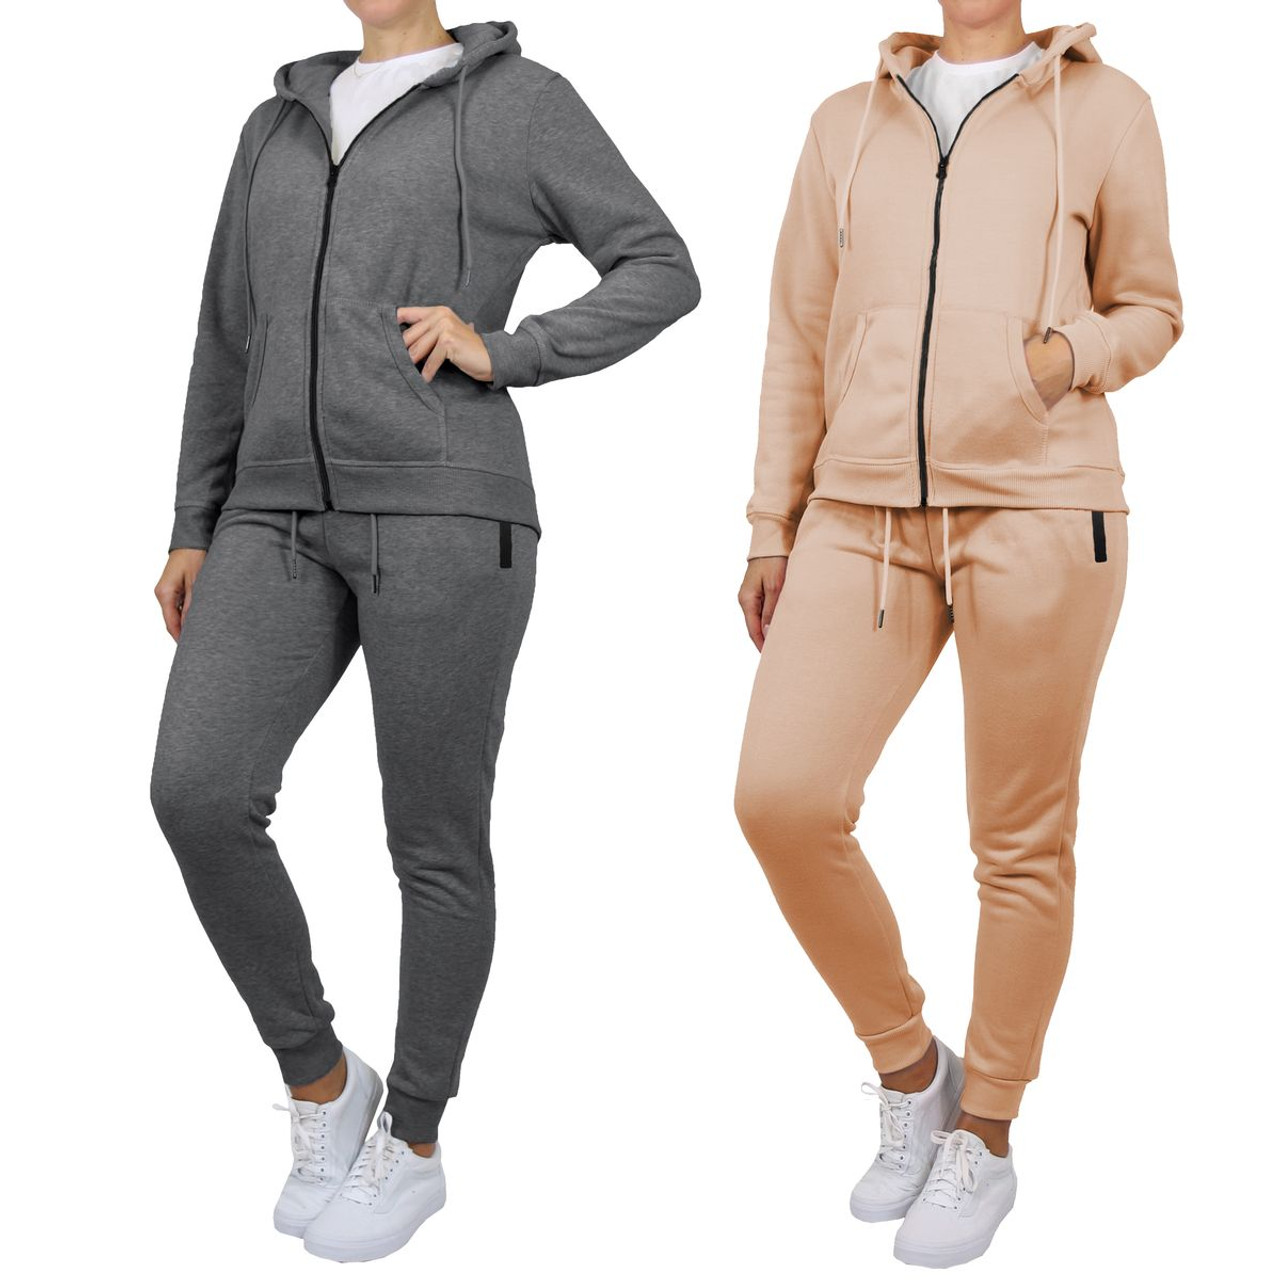 Women's Fleece-Lined Matching Zip-up Hoodie & Jogger (Set of 1 or 2) product image